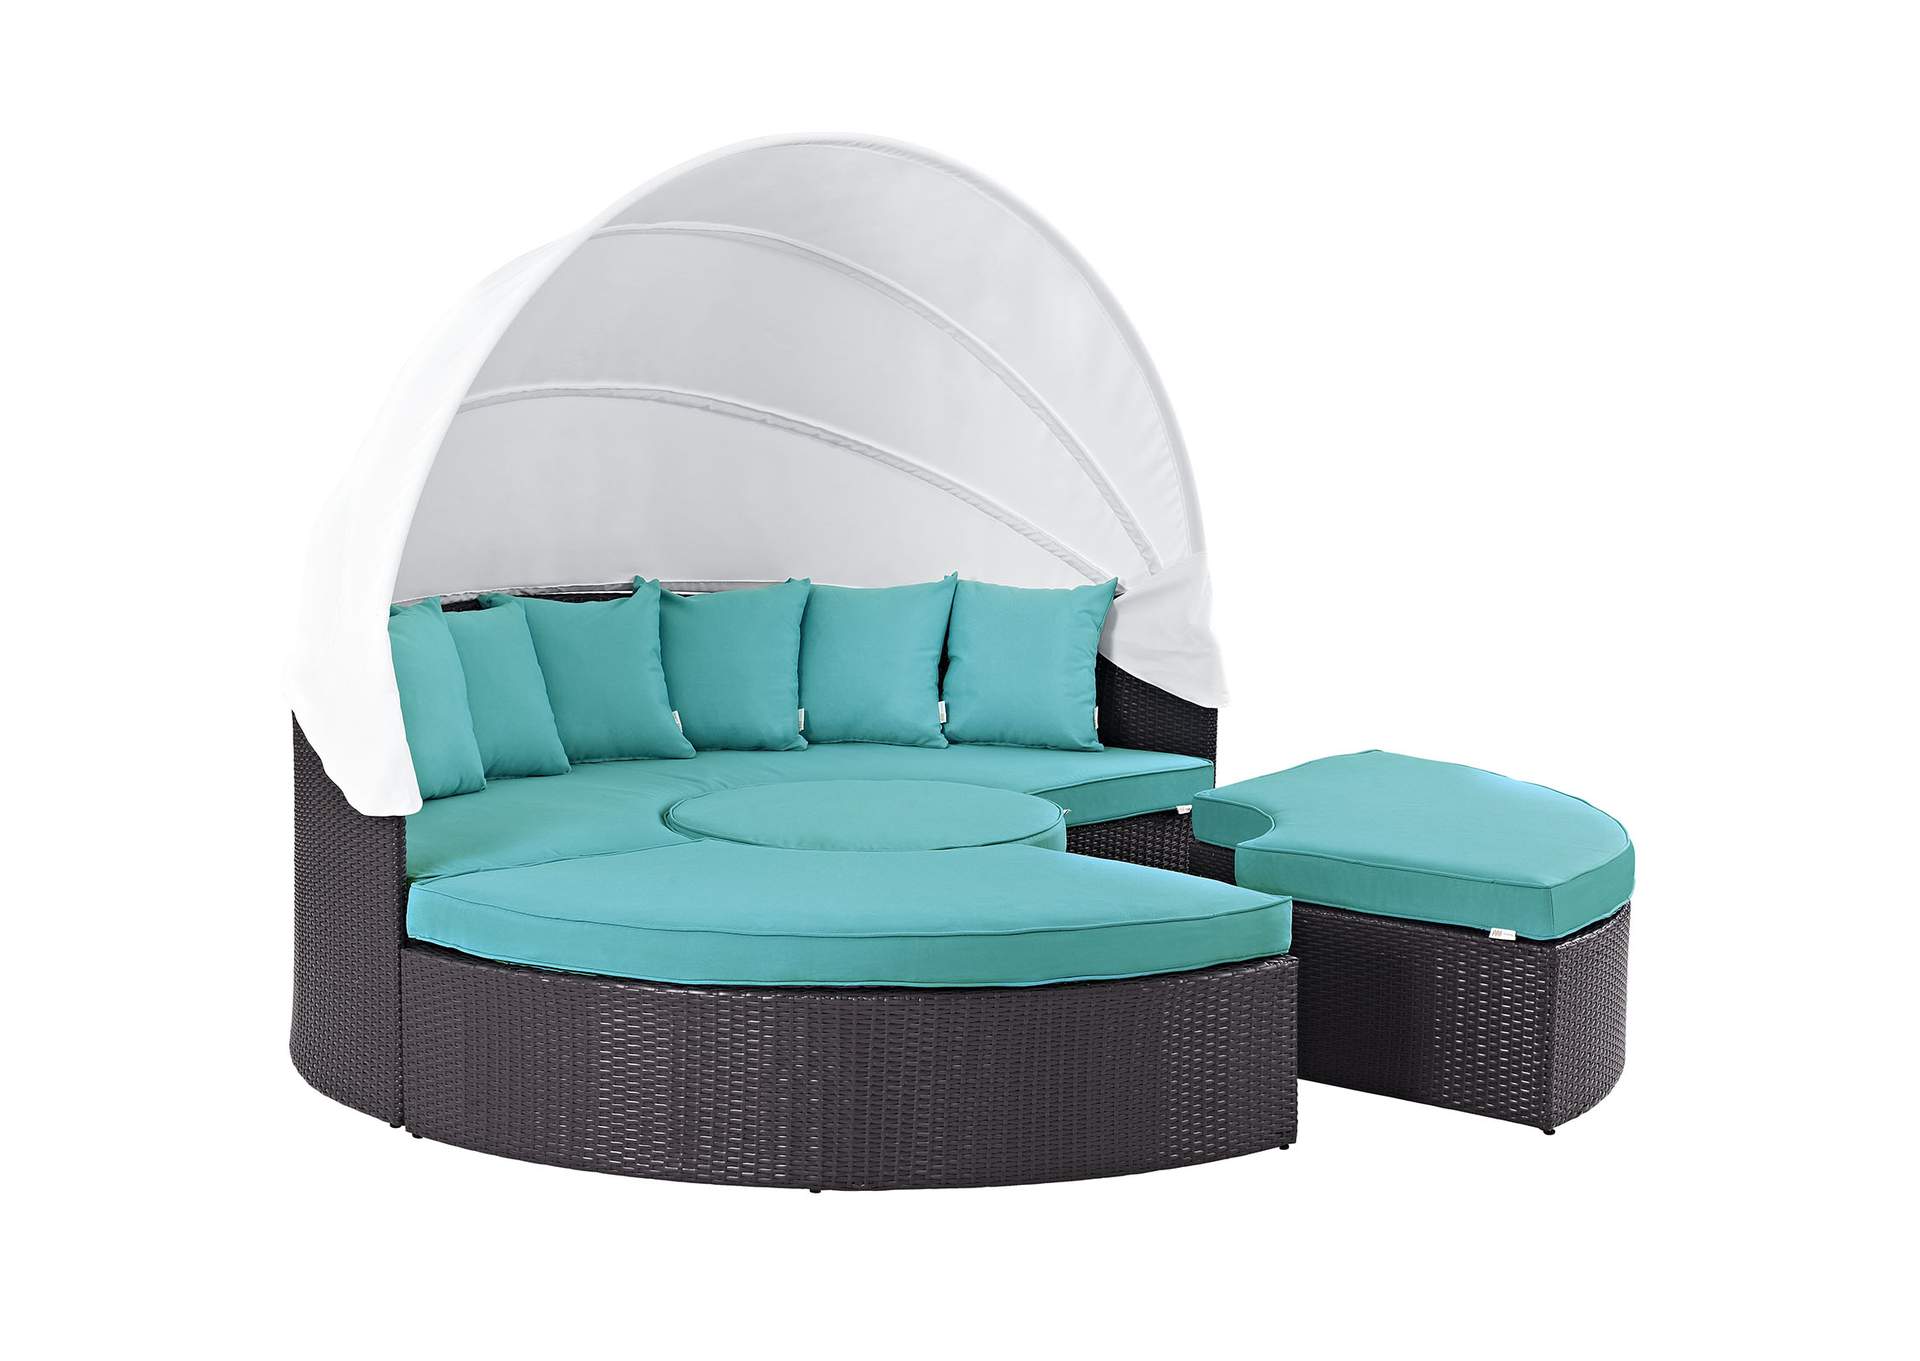 Espresso Turquoise Convene Canopy Outdoor Patio Daybed,Modway